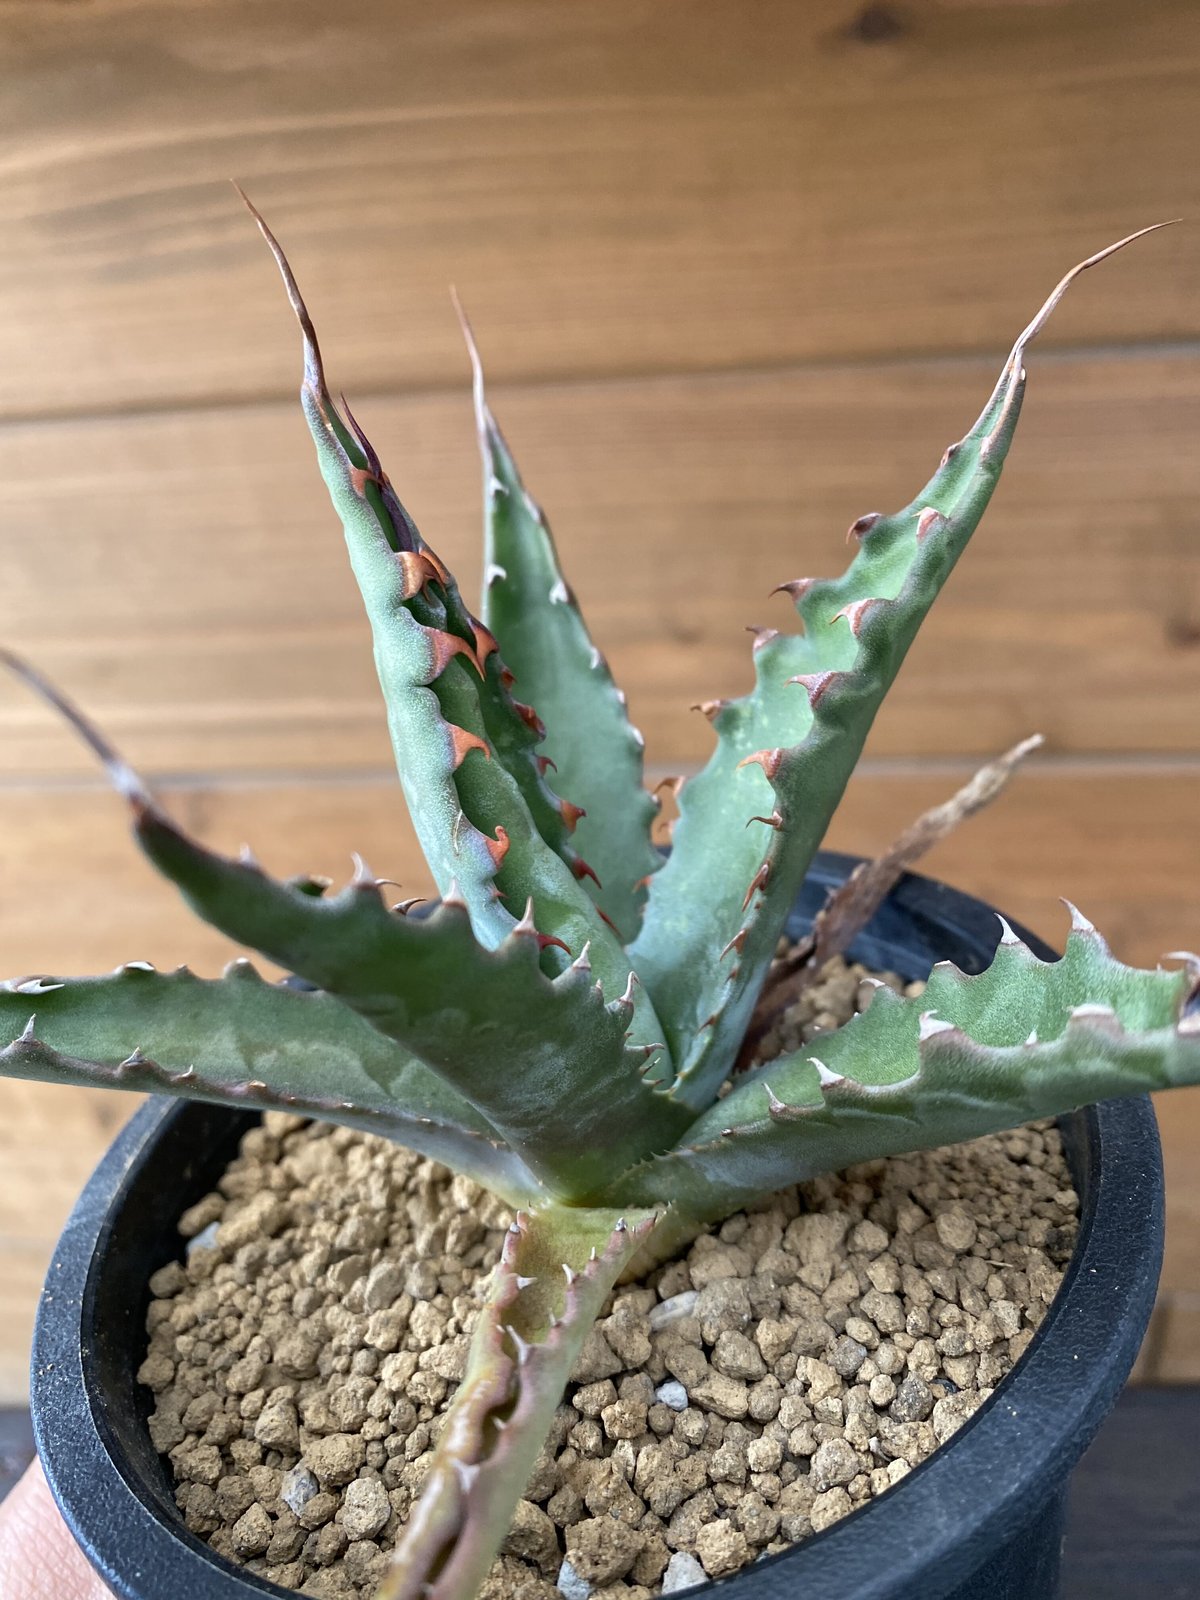 Agave gentry “Jaws”